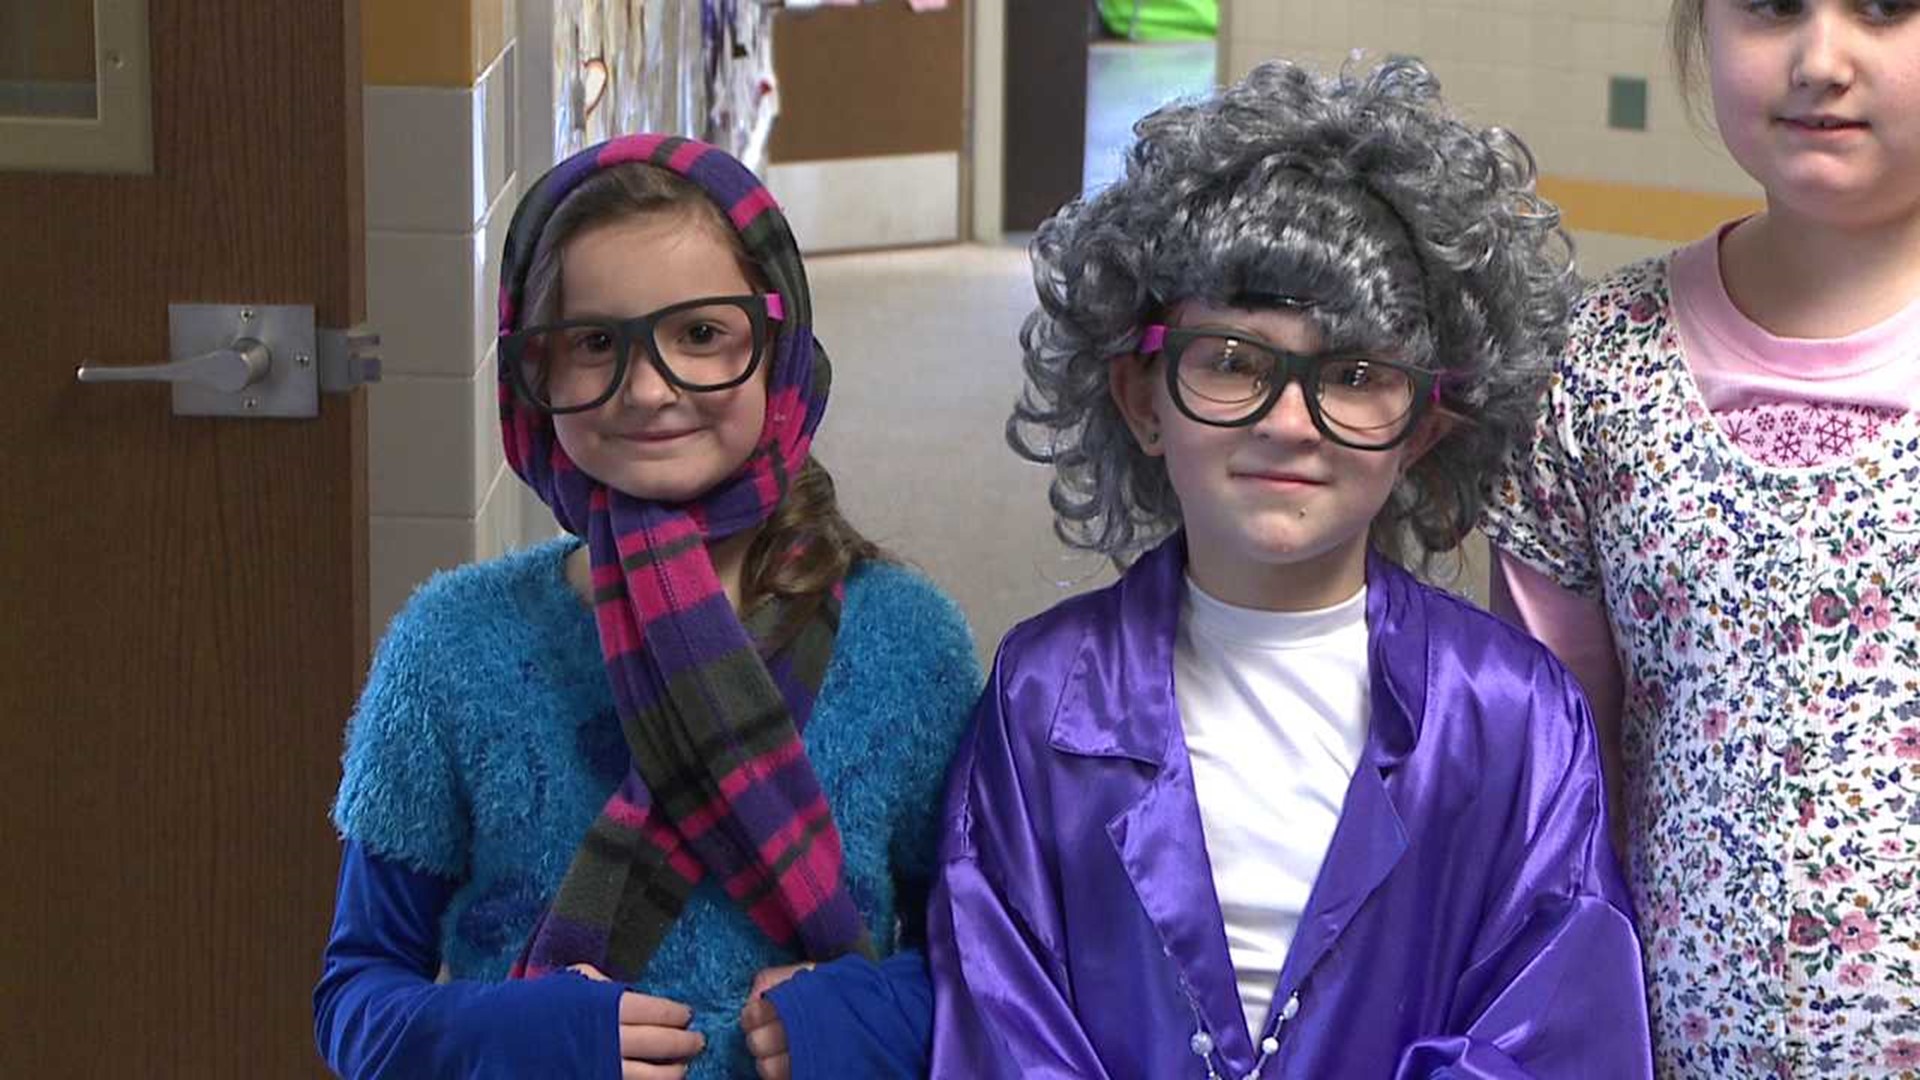 Students Dress As 100 Year Olds to Mark 100th School Day